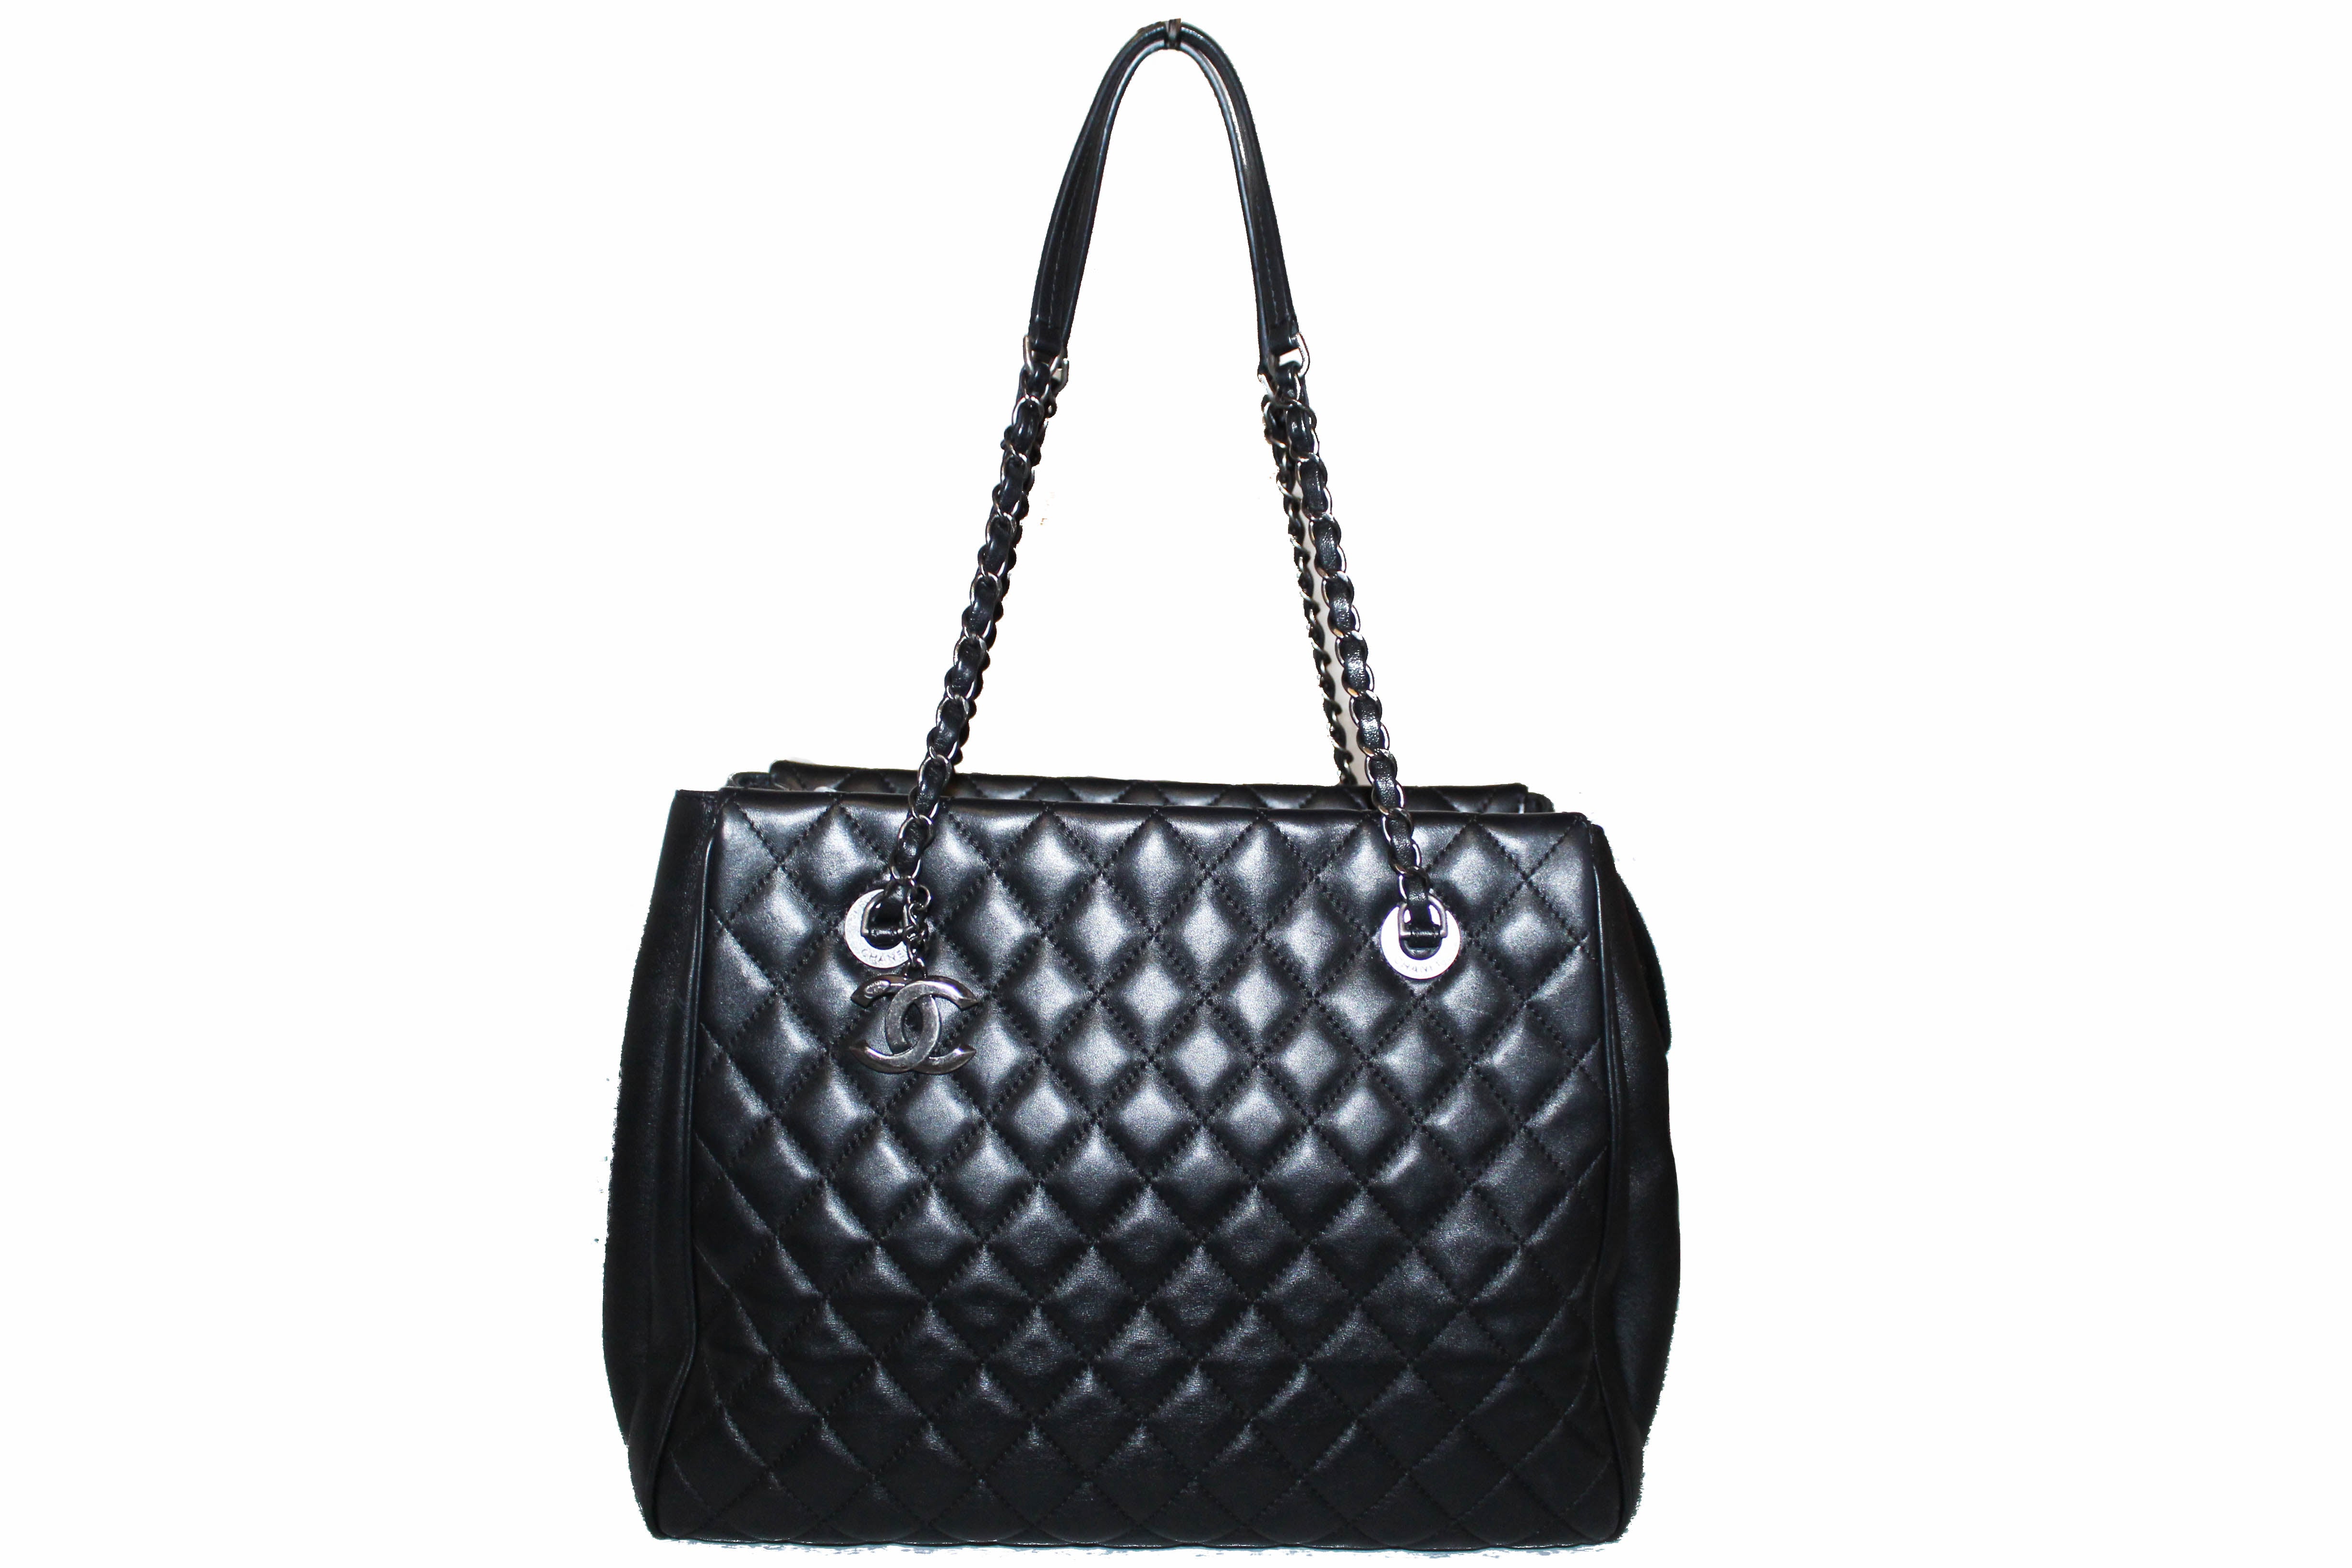 Authentic Chanel Black Quilted Lambskin Leather Tote Bag